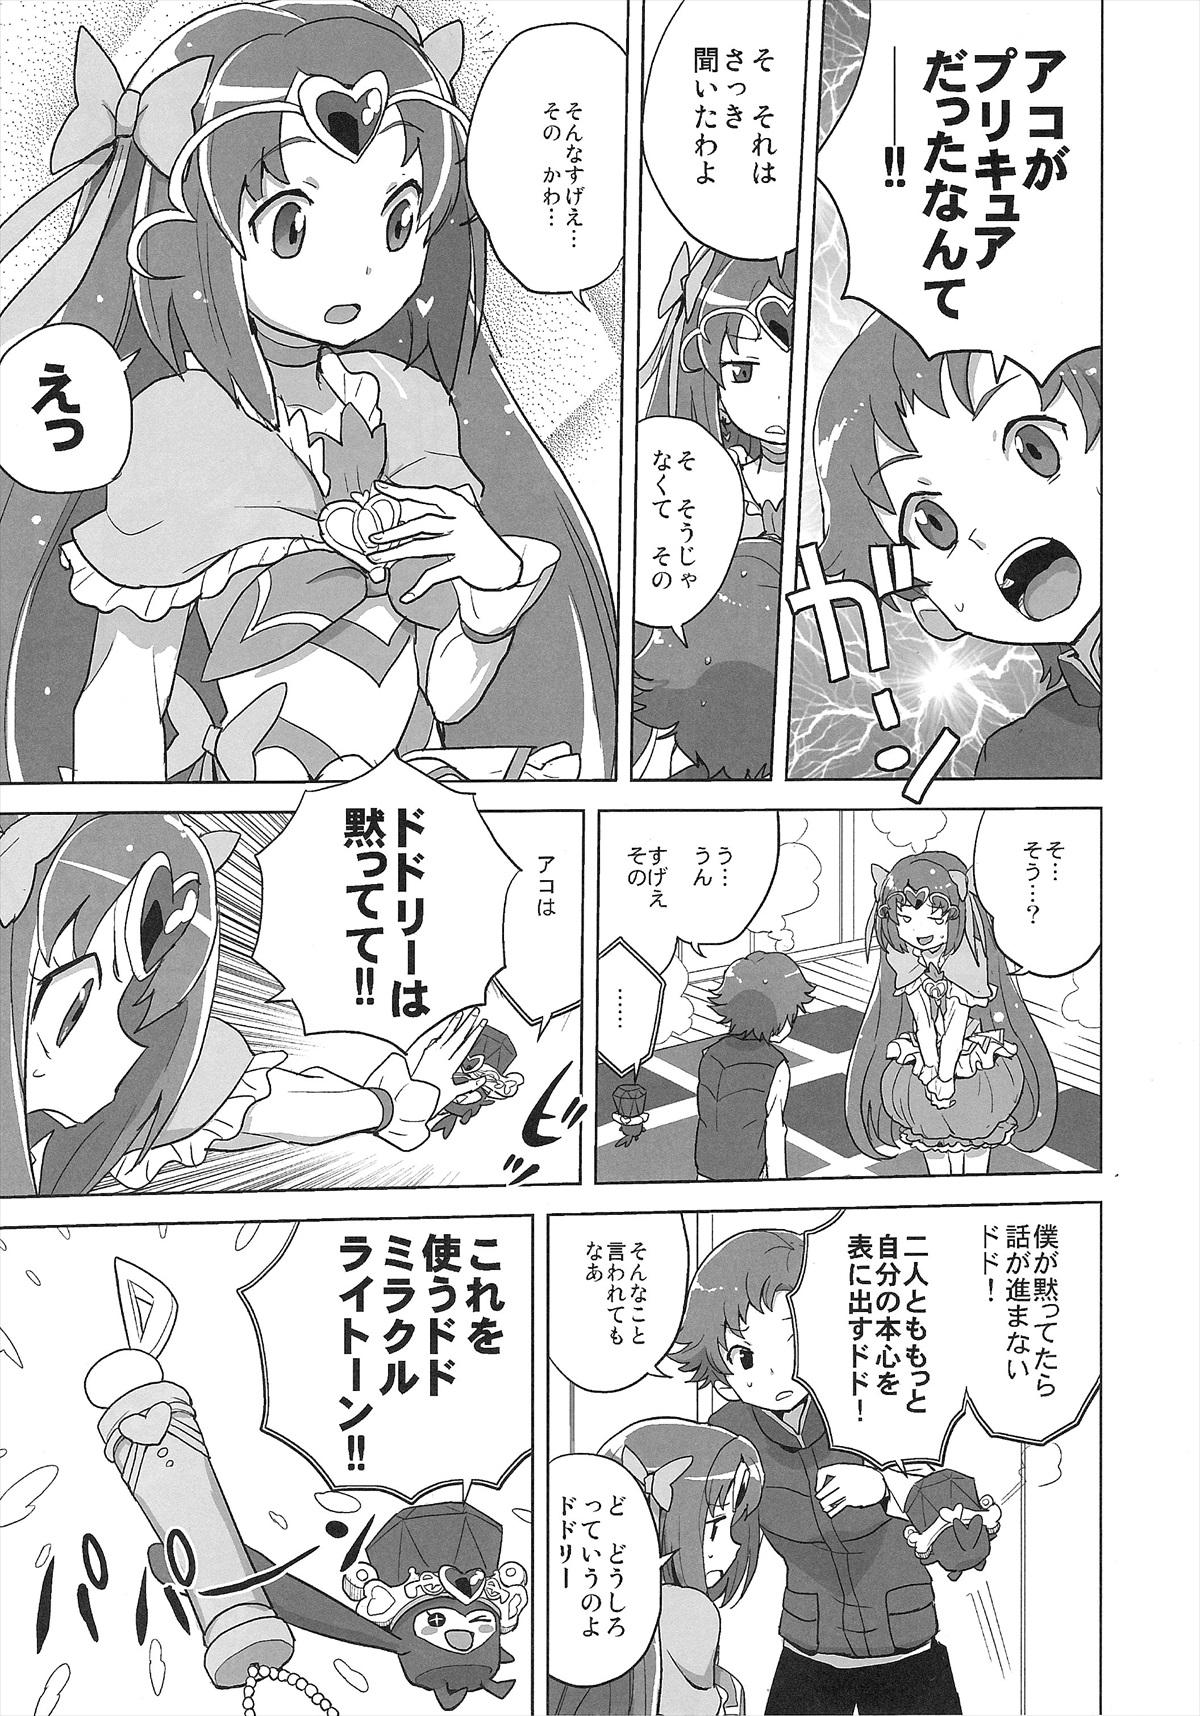 Girls Muse! x3 - Suite precure Spy Camera - Page 8